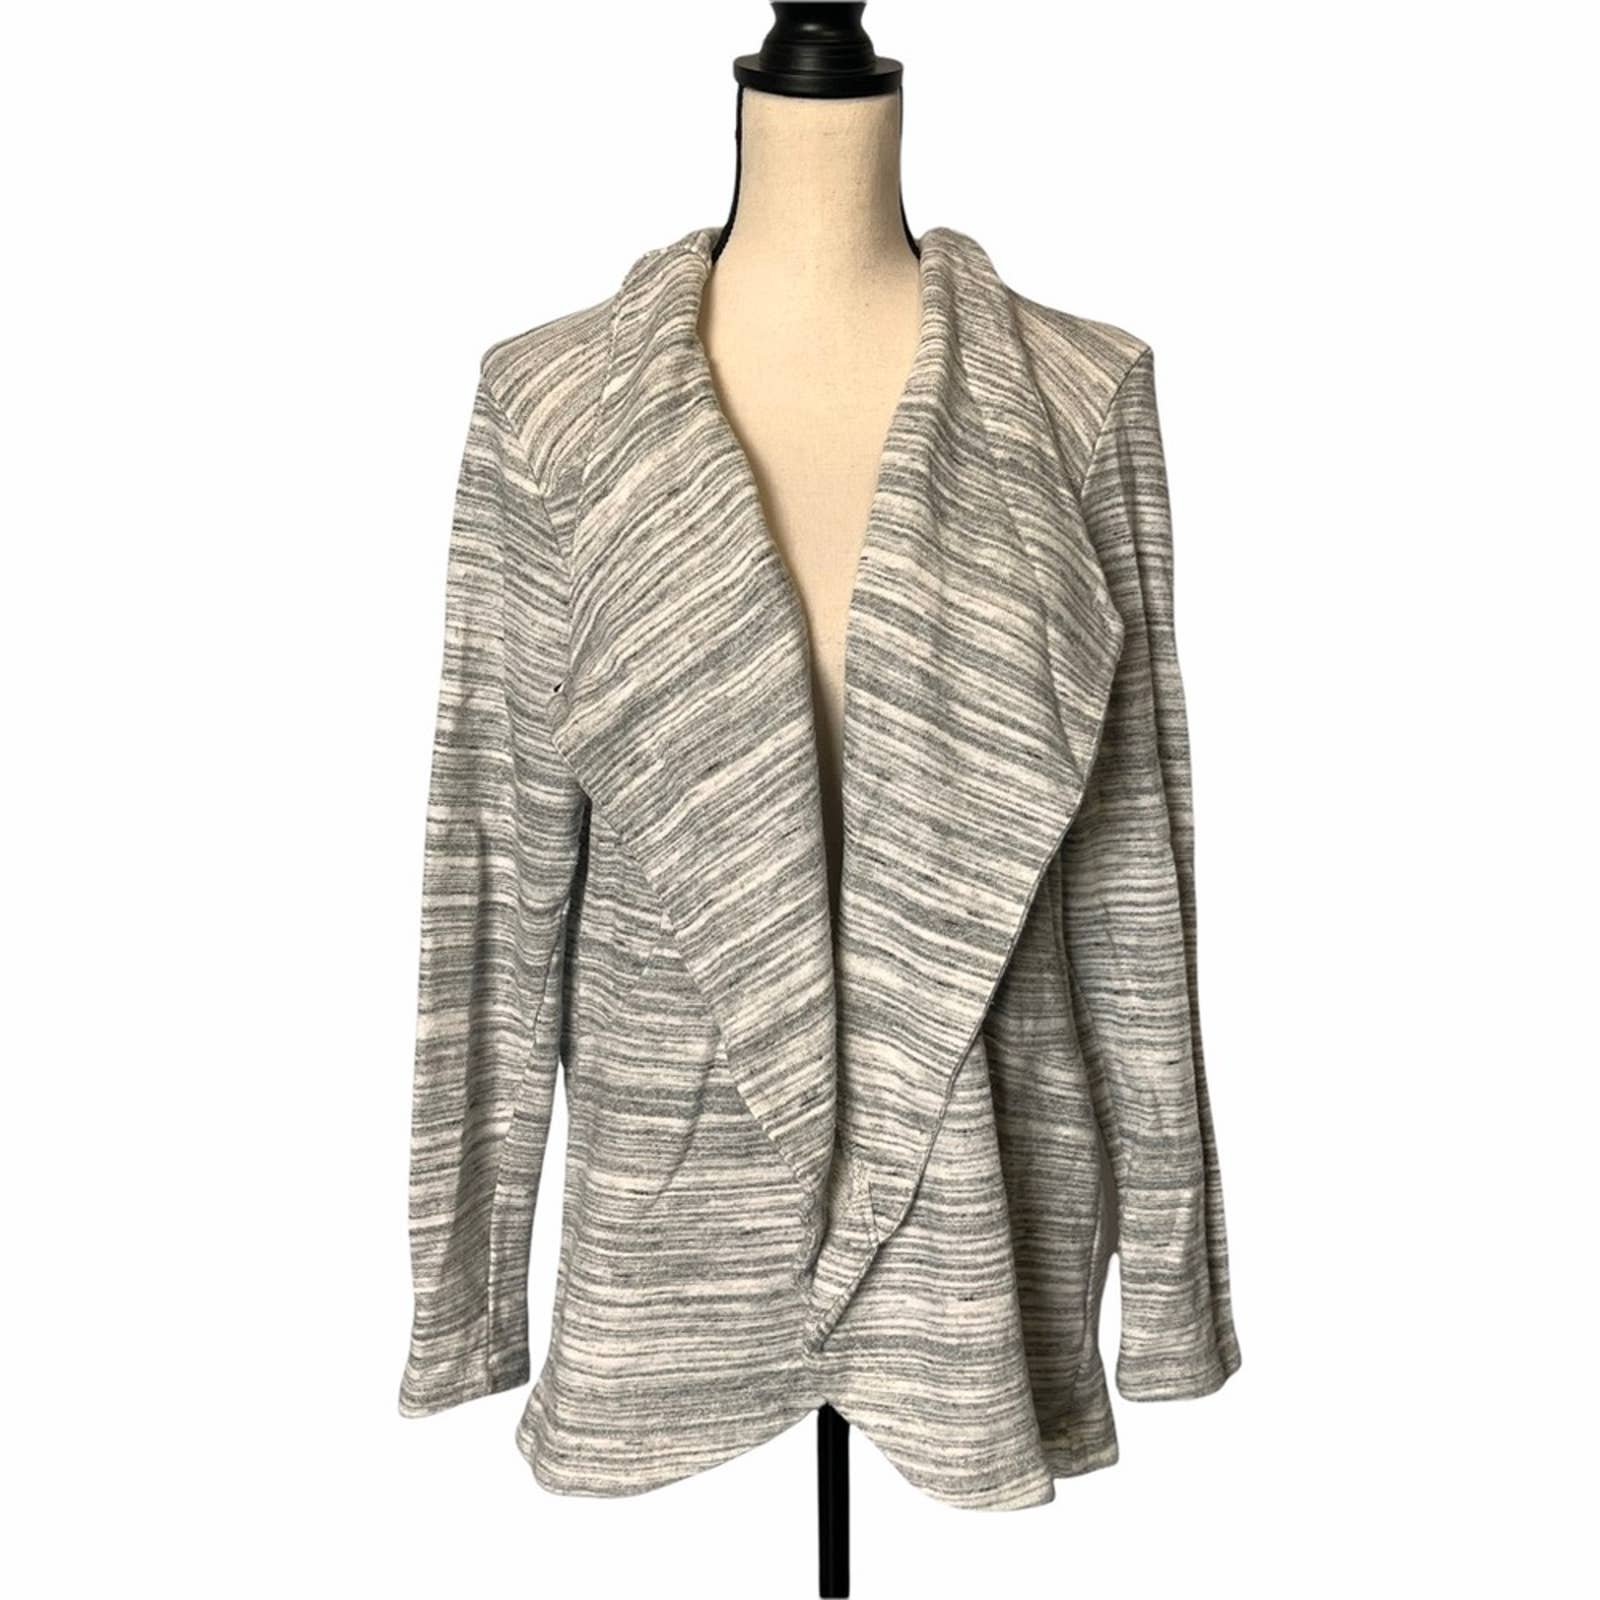 where to buy  Maurices wrap sweater/ cardigan. Size 1 oversized oG5DThI4m hot sale